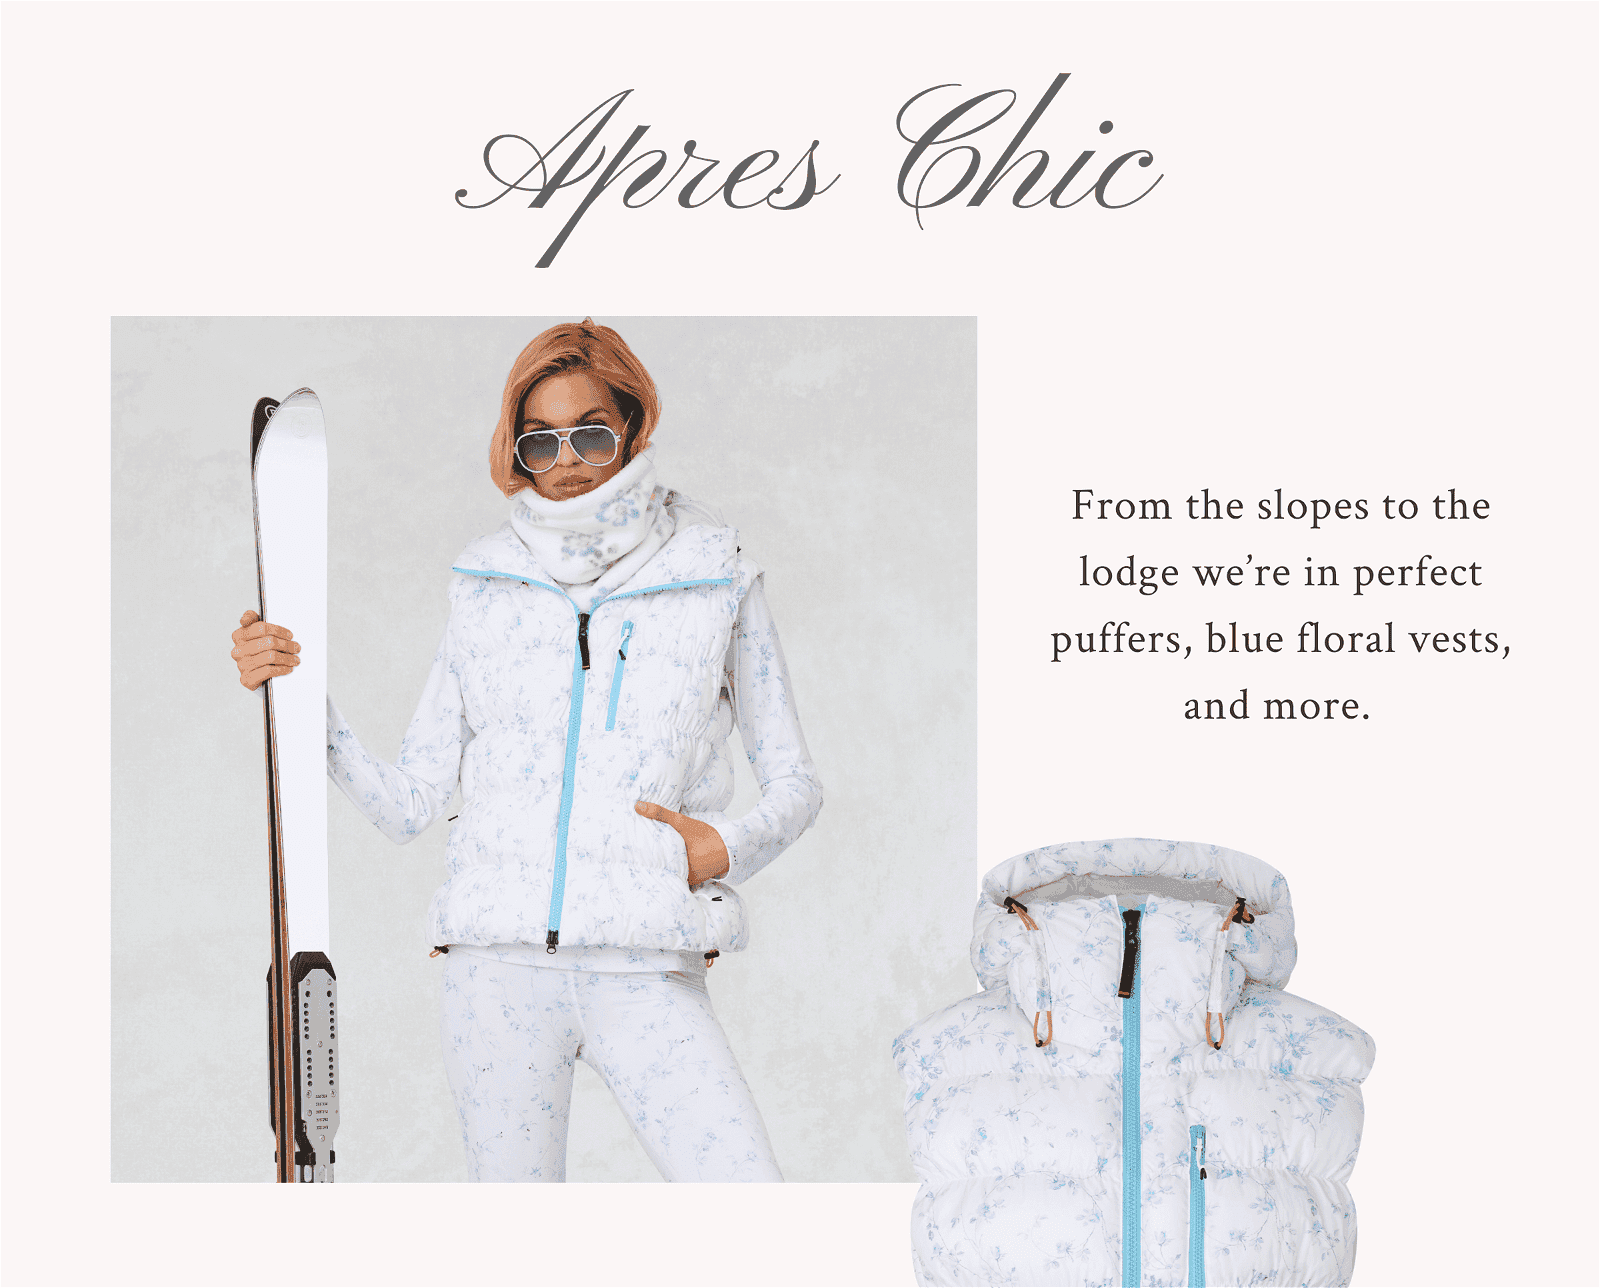 From the slopes to the lodge we’re in perfect puffers, blue floral vests, and more.